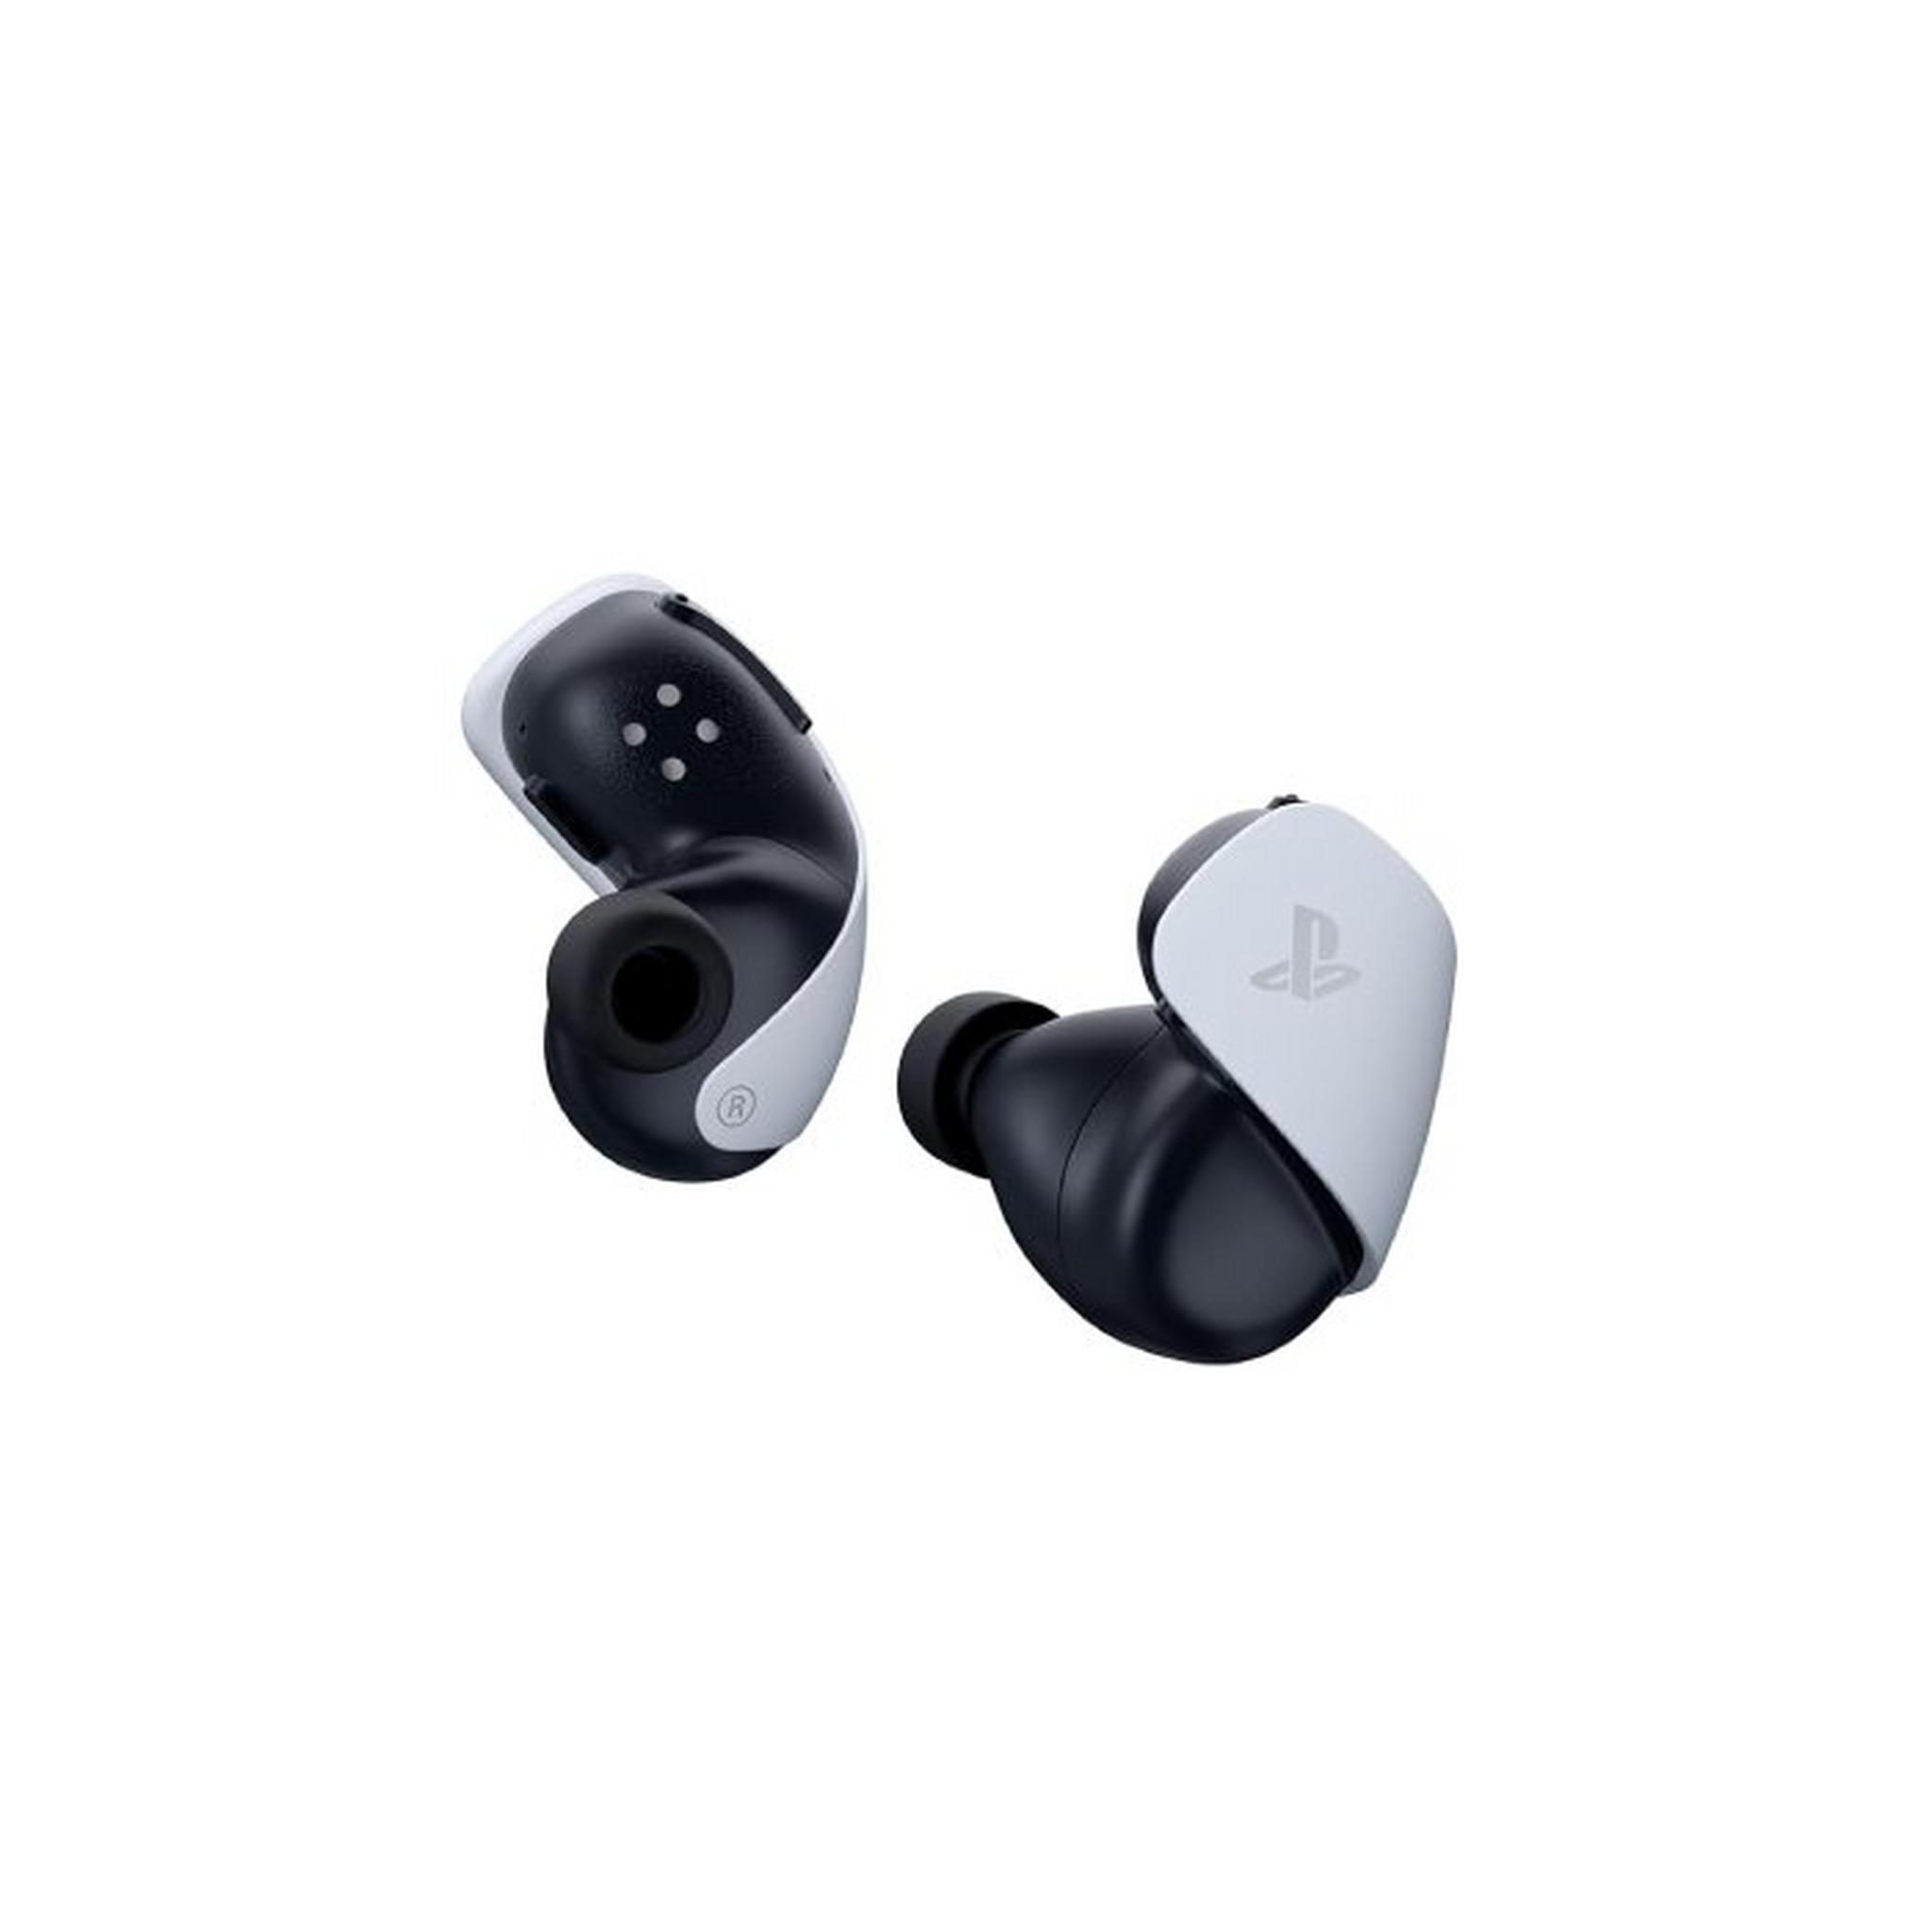 Sony Playstation 5 Pulse Explore Wireless Earbuds – Black/White